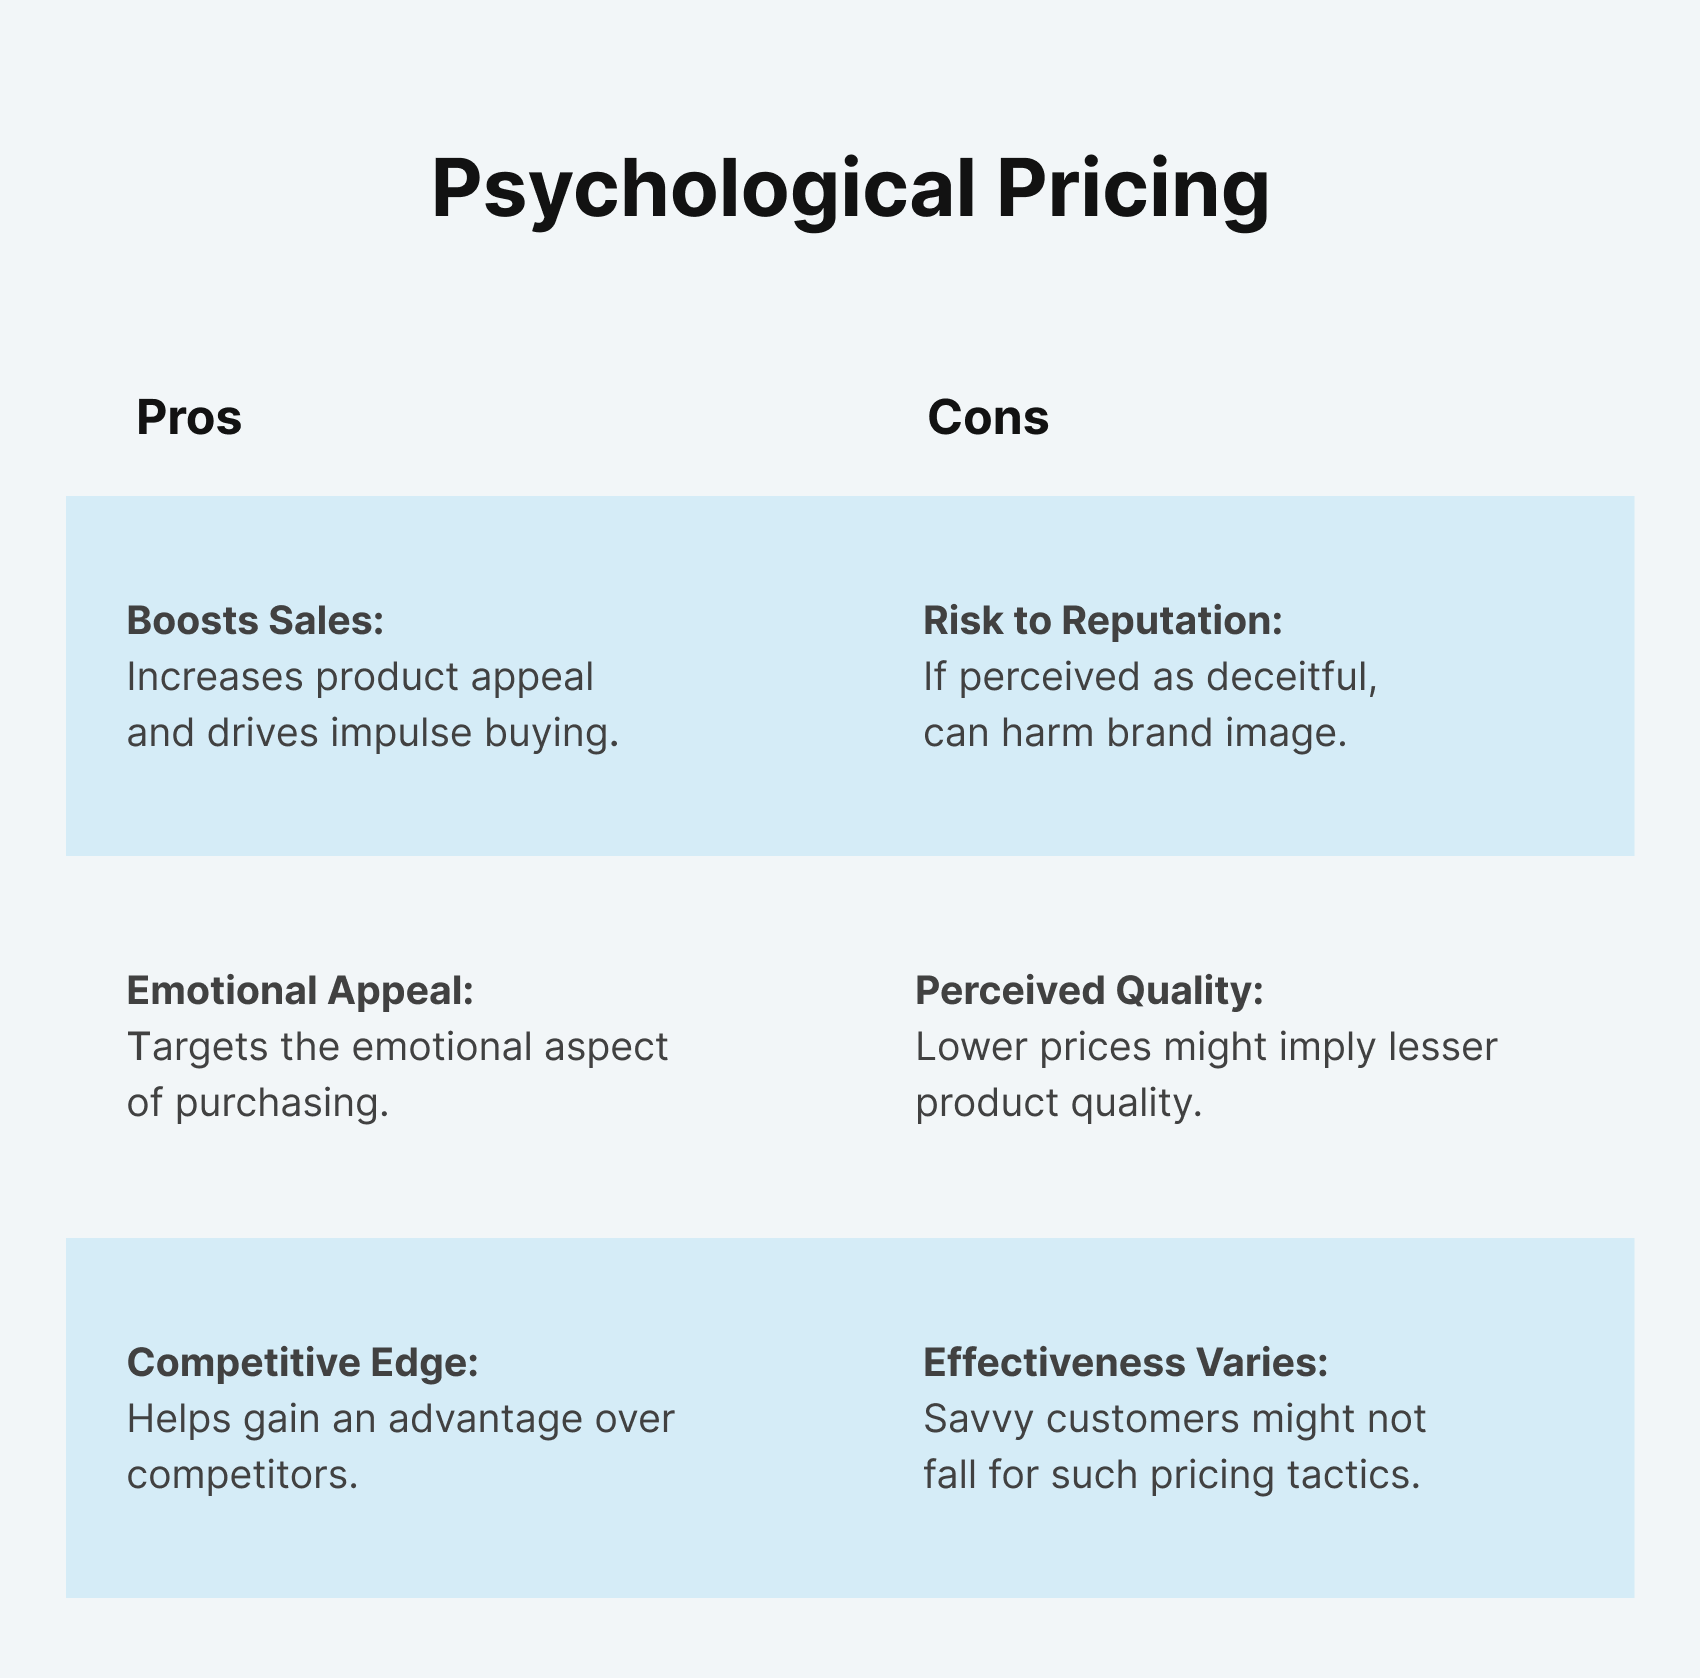 Psychological pricing Pros and Cons